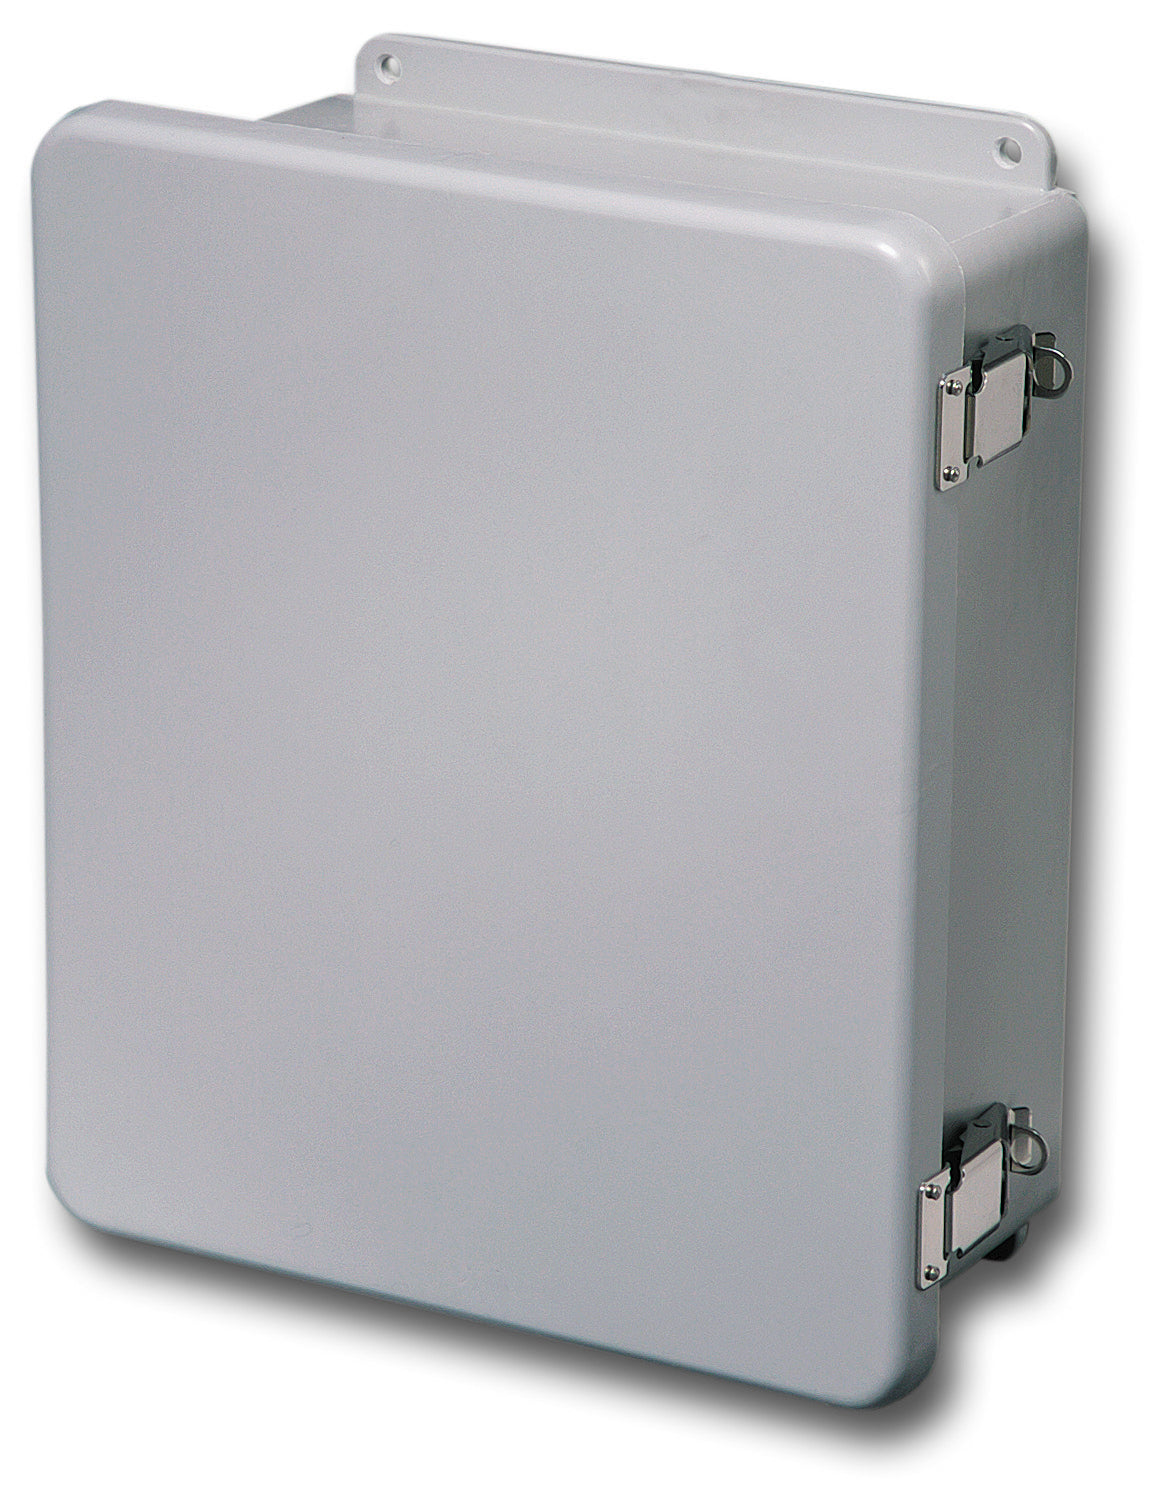 N4X   FG   CHQR Series     Fiberglass Enclosures with Hinged Cover and Quick Release Latch